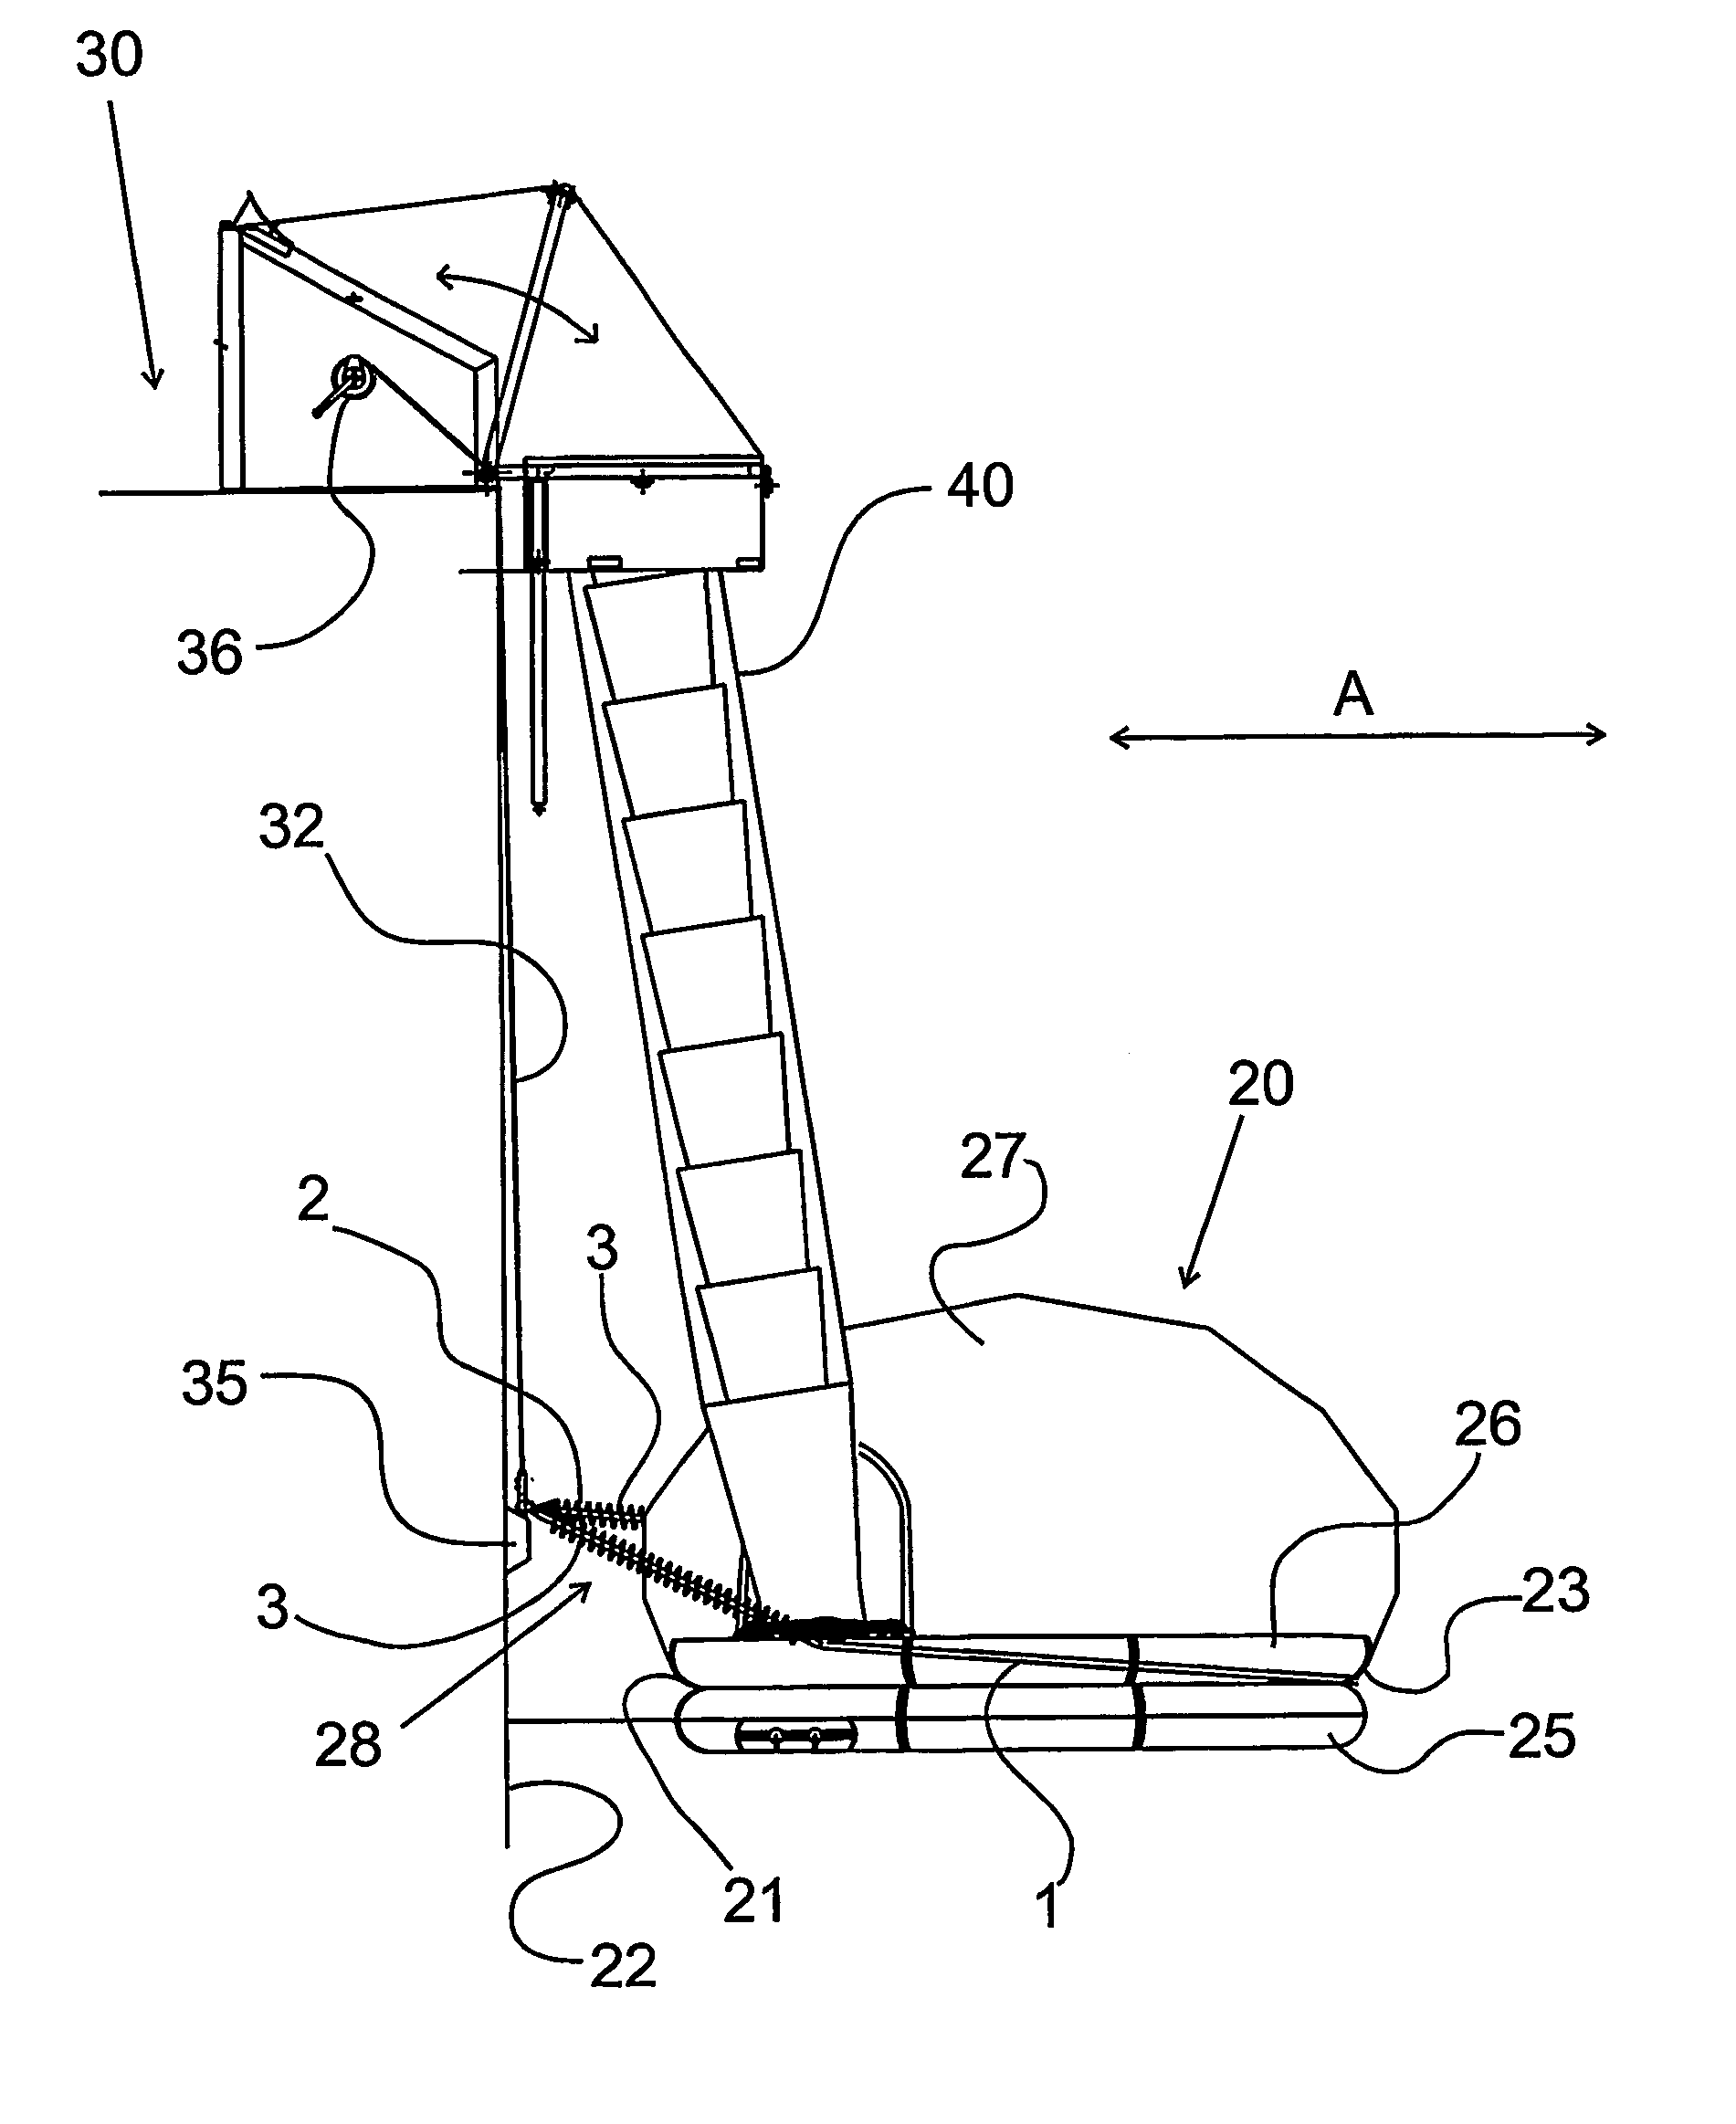 Mooring of a floating unit to a vessel side